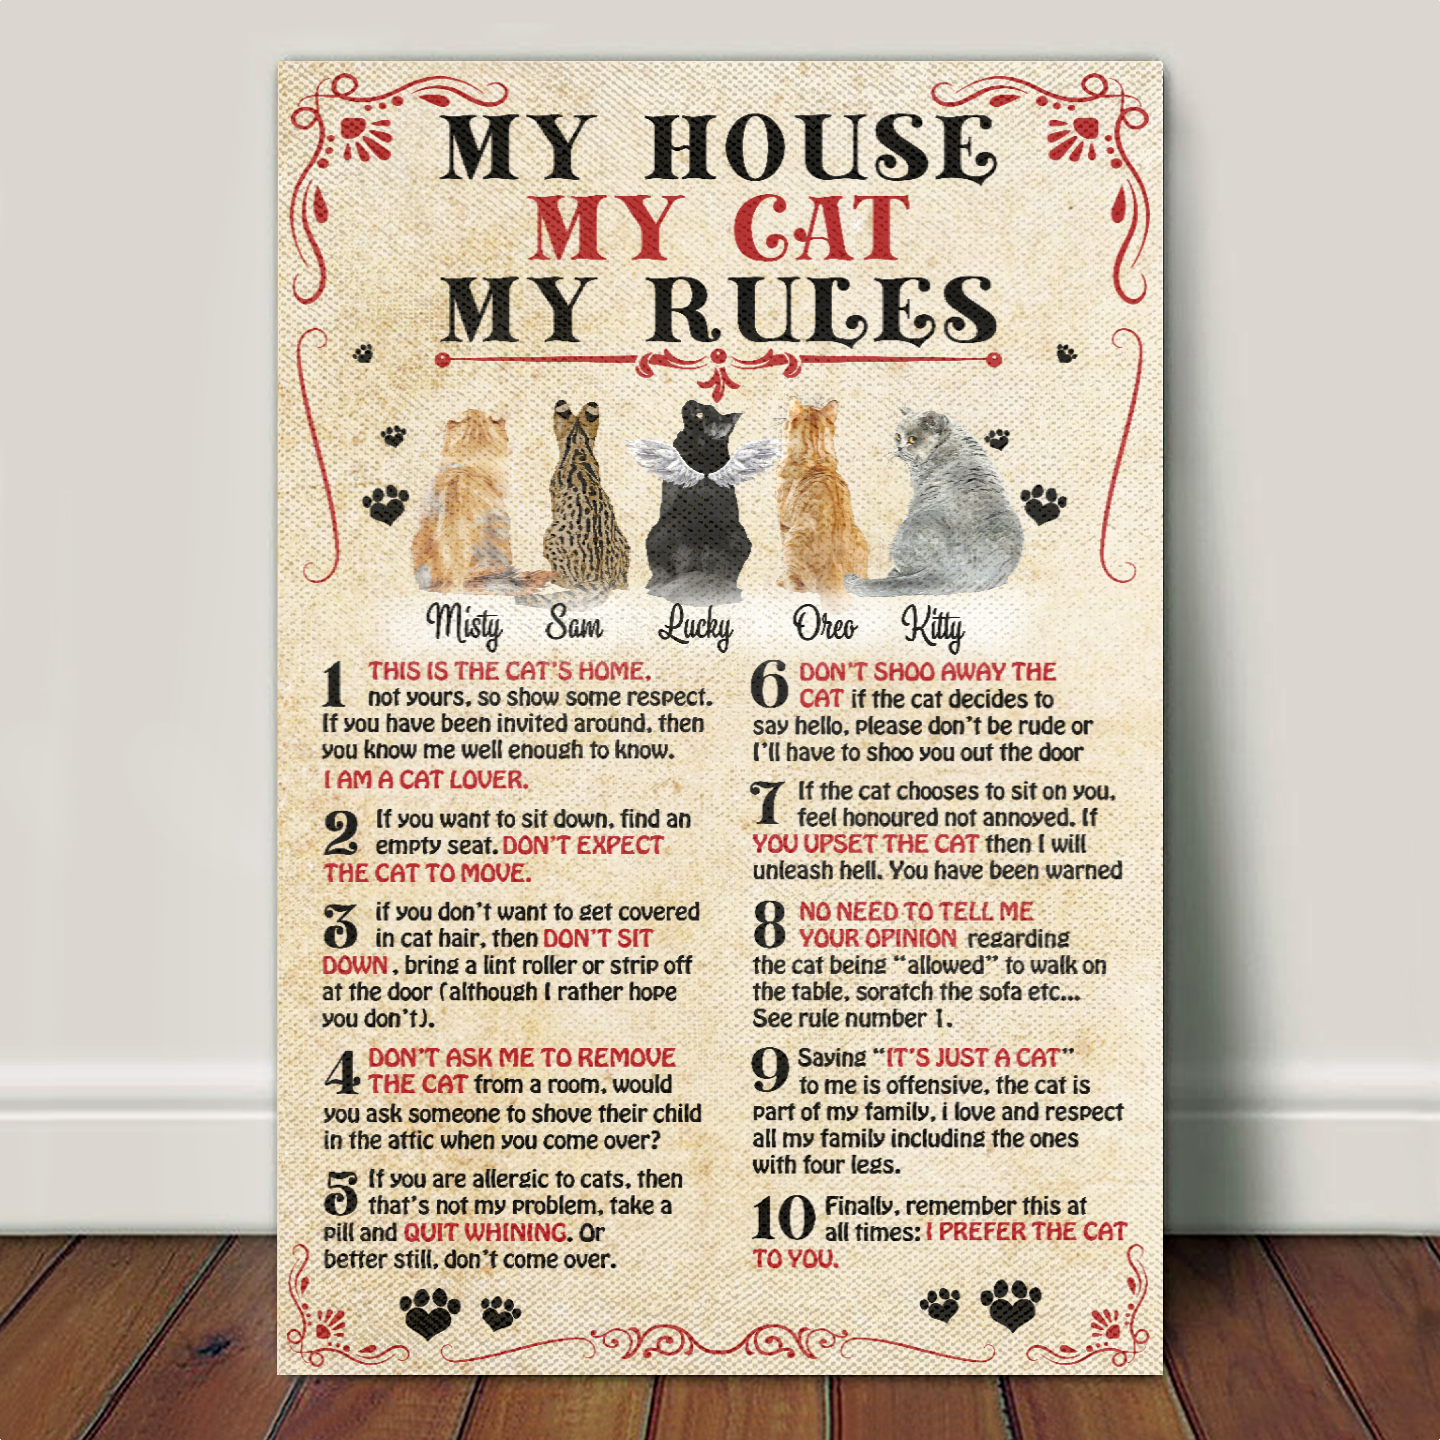 Ciaocustom Custom Poster/Framed Canvas/Unframed Canvas, Custom Cat Breeds, Gifts For Cat Lovers, My House - My Cat - Their Rules